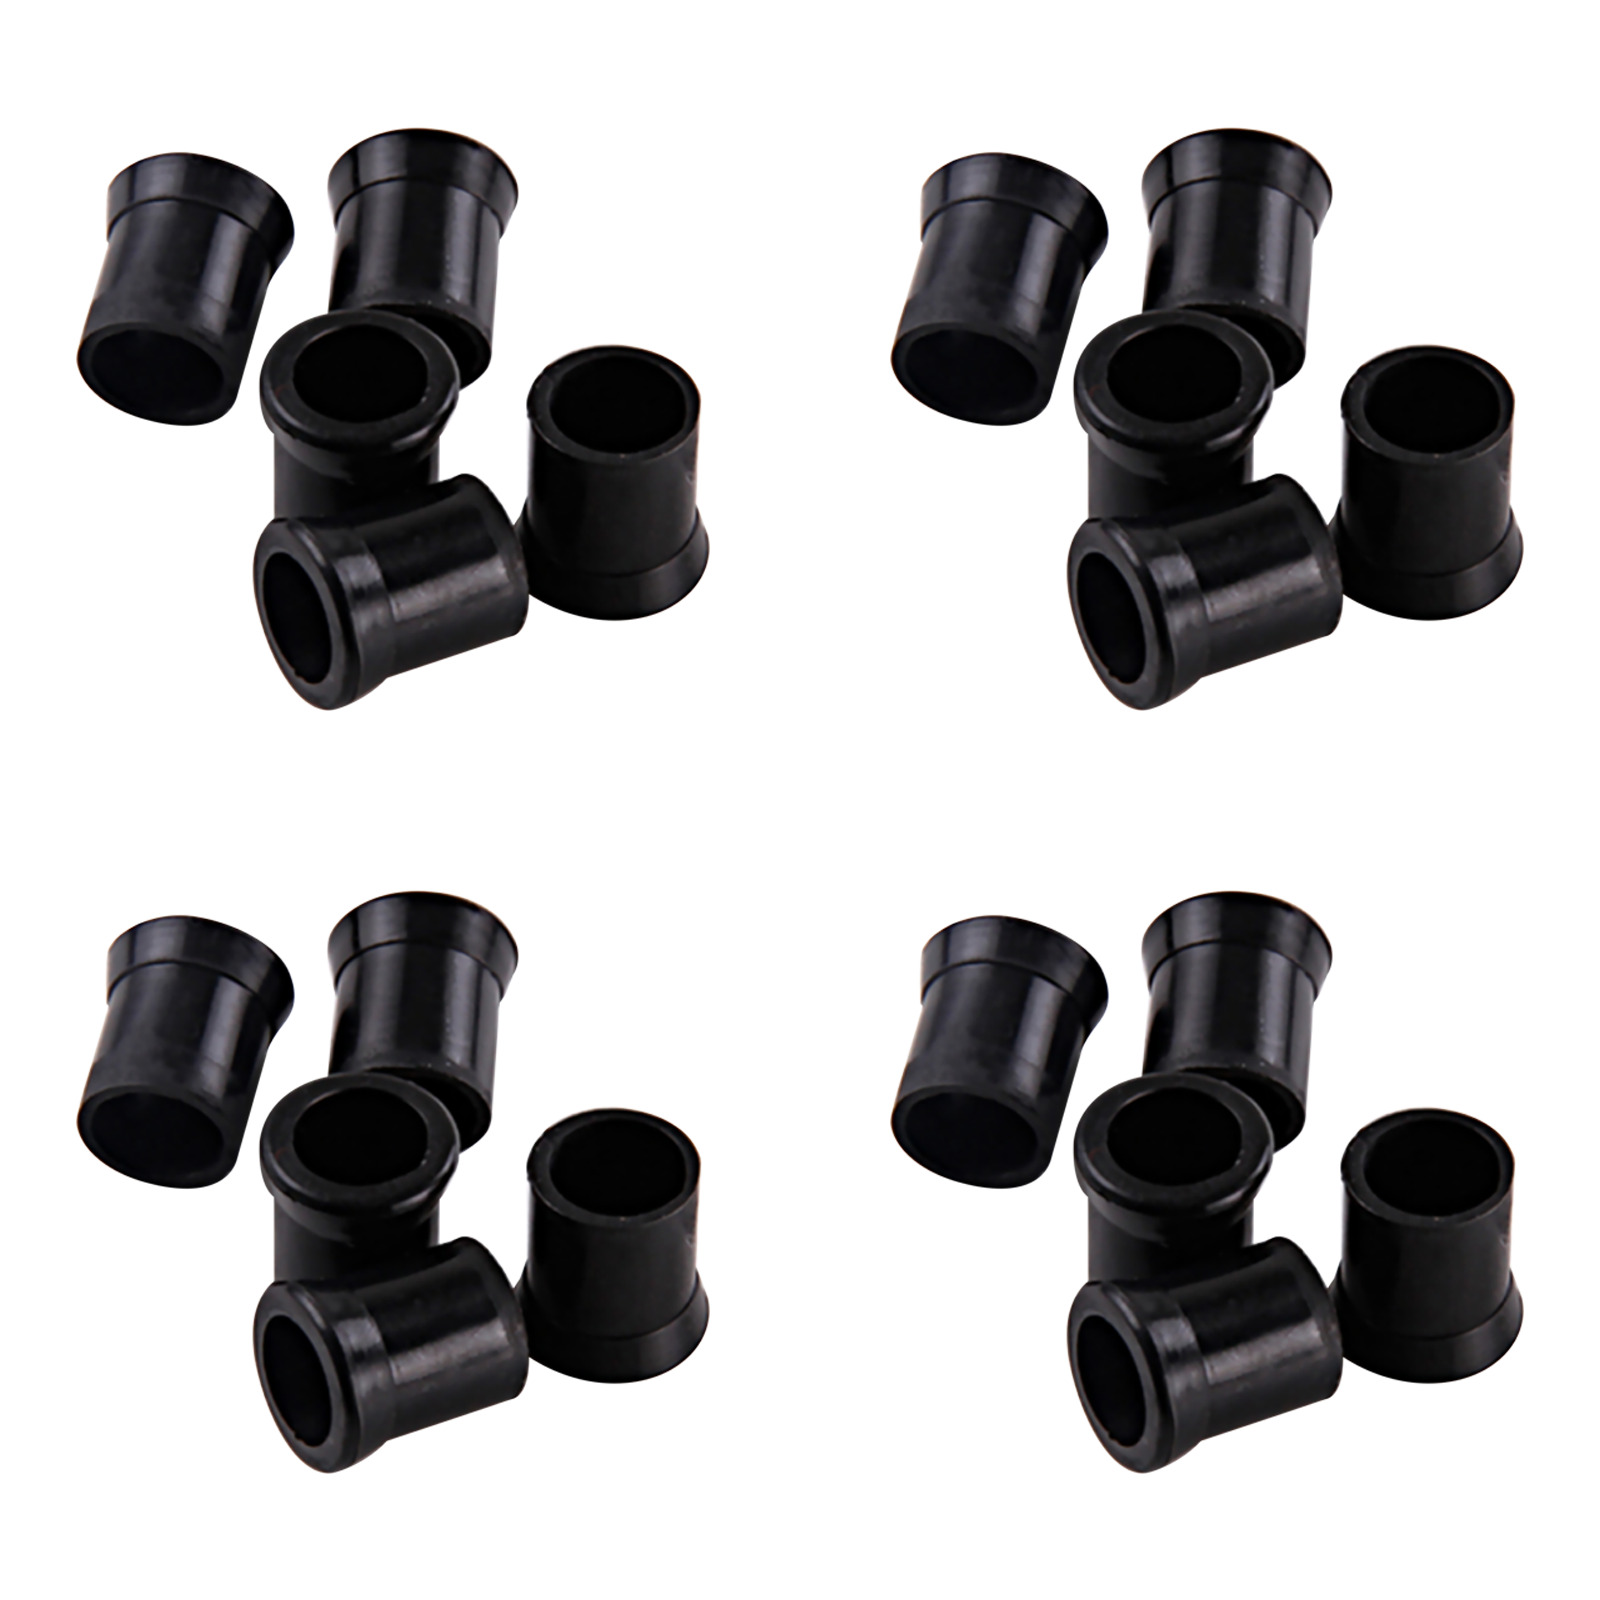 20Pcs Tobacco Pipe Mouthpiece Bit Rubber Cover Smoking Pipes Protective Sleeve